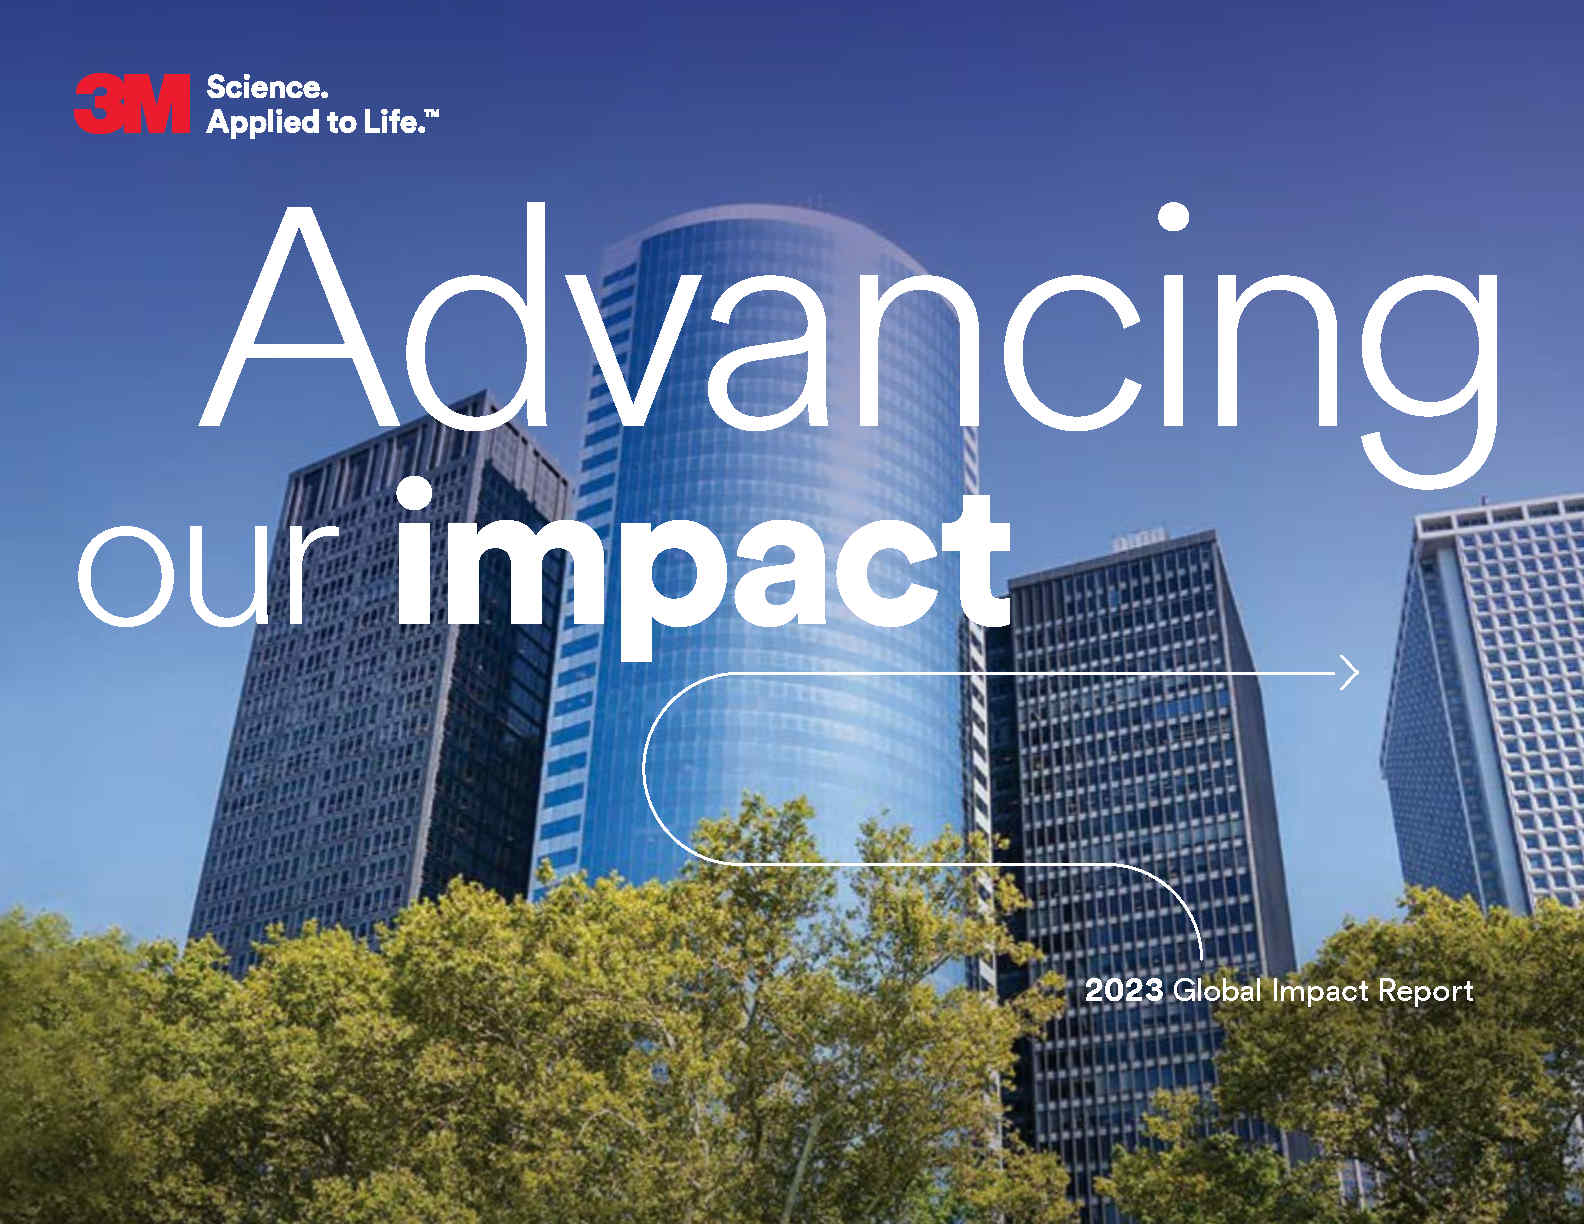 "Advancing our impact" with cityscape